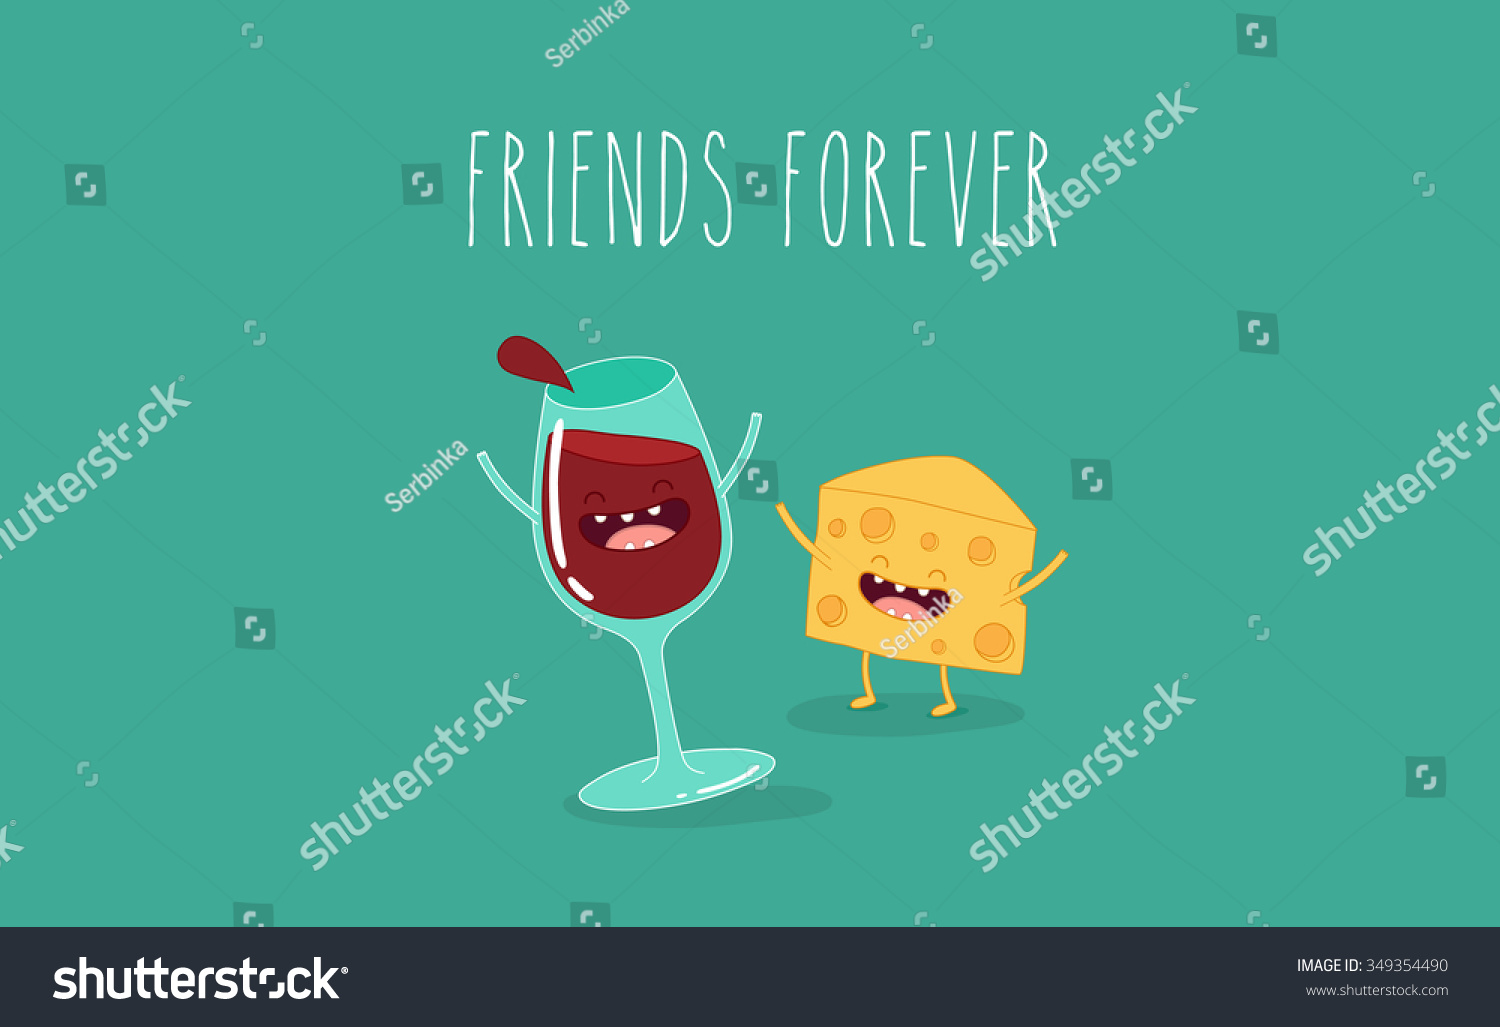 SVG of Wine, cheese vector illustration. Vector cartoon. Friends forever. Comic characters. Use for card, poster, banner, web design and print on t-shirt. Easy to edit. svg